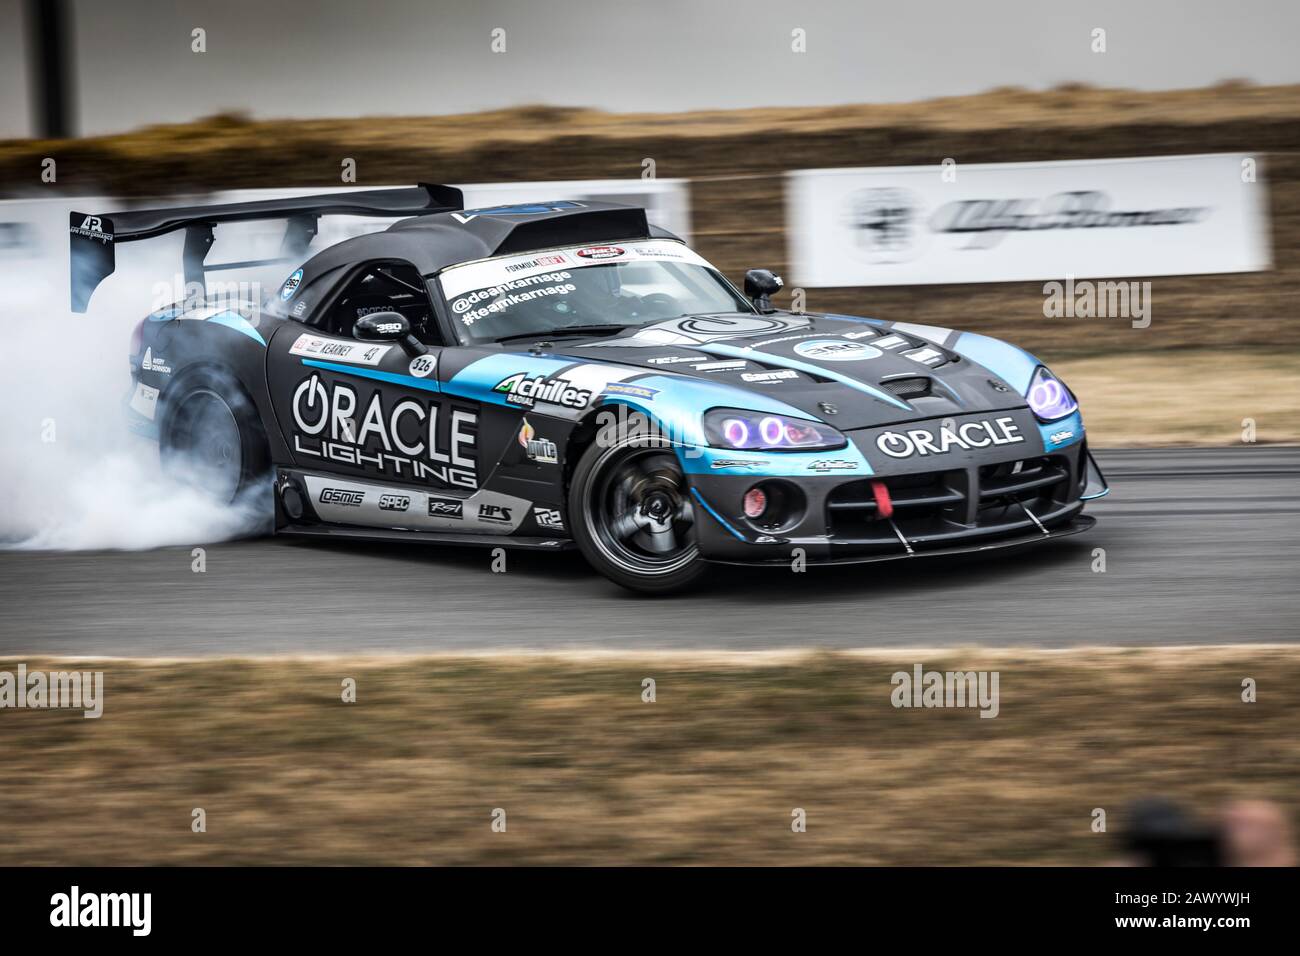 Dean Kearney drifting a 2016 Dodge Viper to produce copious rear tyre smoke at the 2018 Goodwood Festival of Speed. Stock Photo